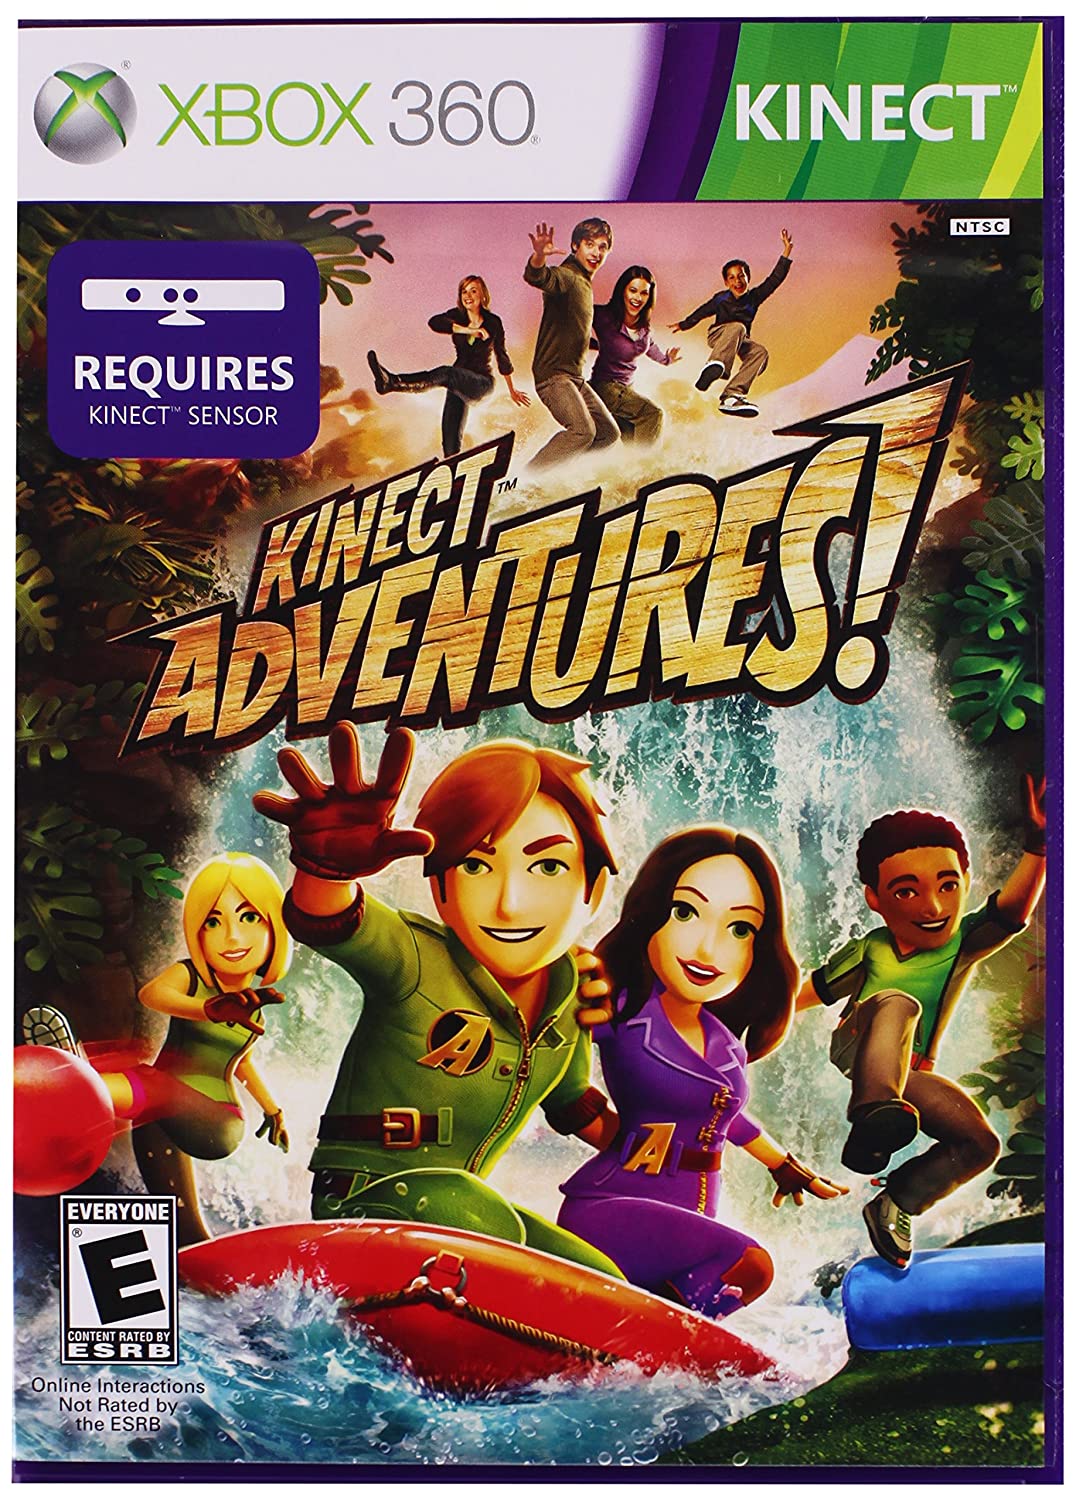 Kinect Adventures - Darkside Records